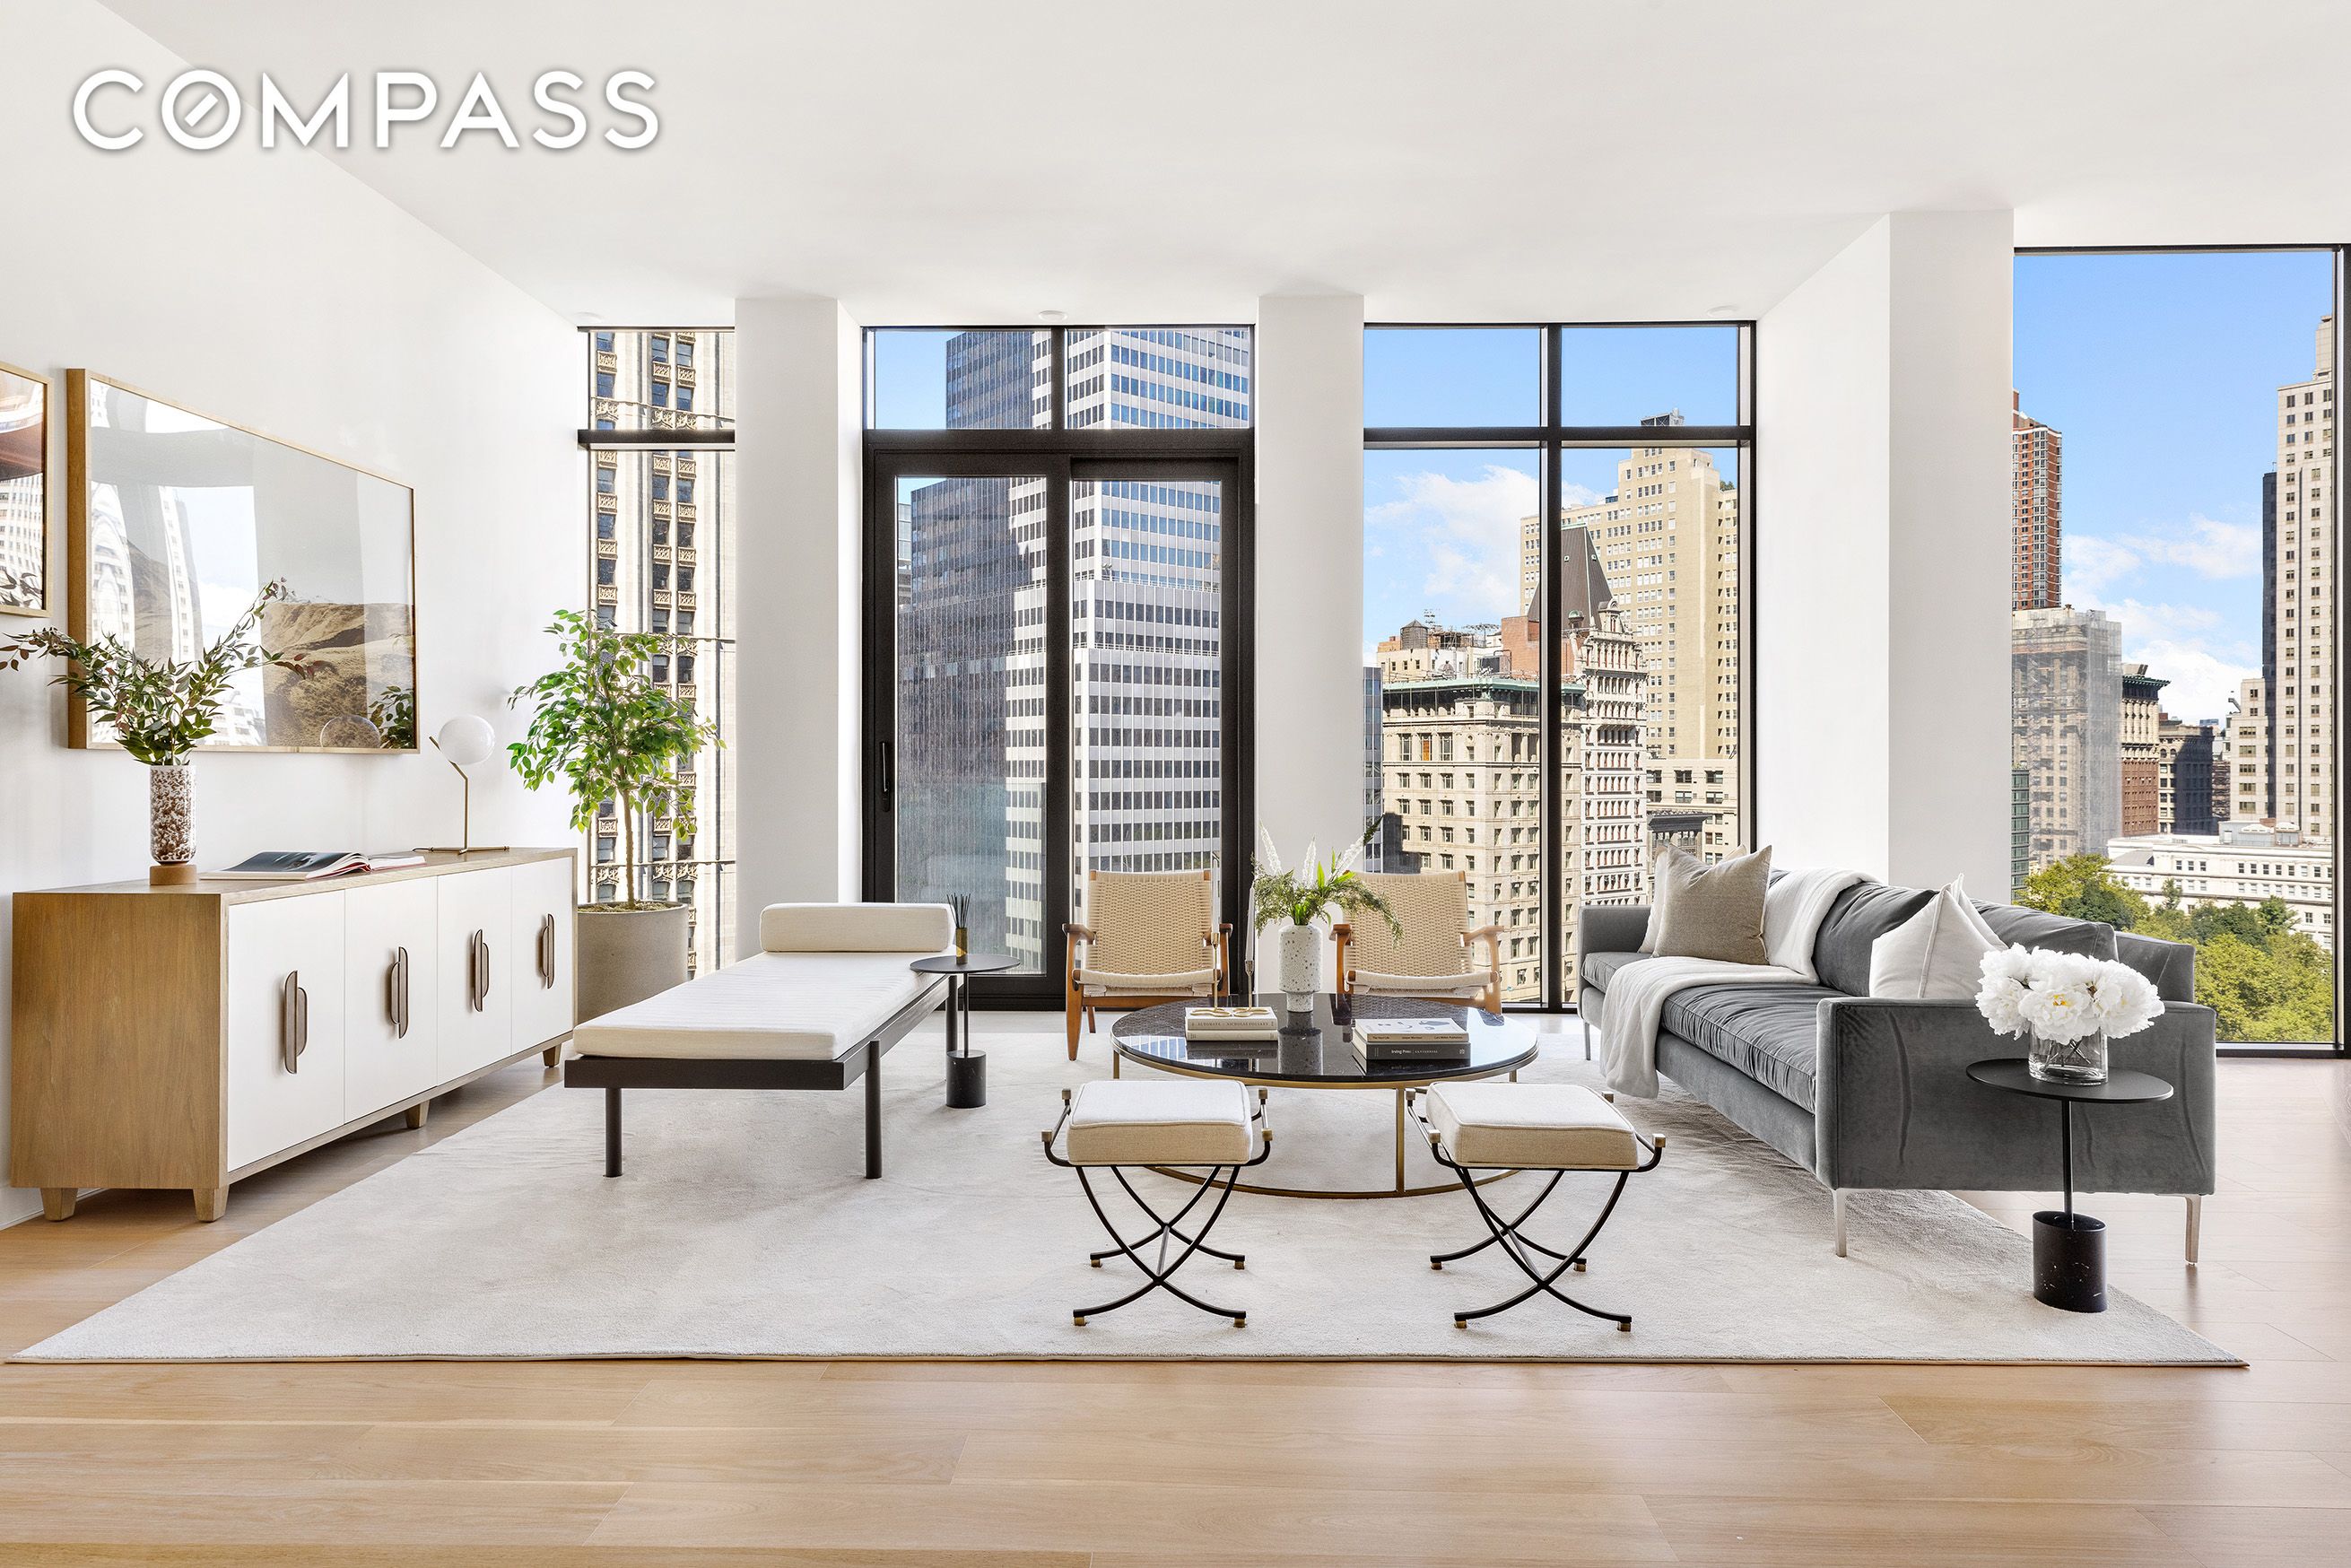 33 Park Row 15A, Financial District, Downtown, NYC - 3 Bedrooms  
3.5 Bathrooms  
8 Rooms - 